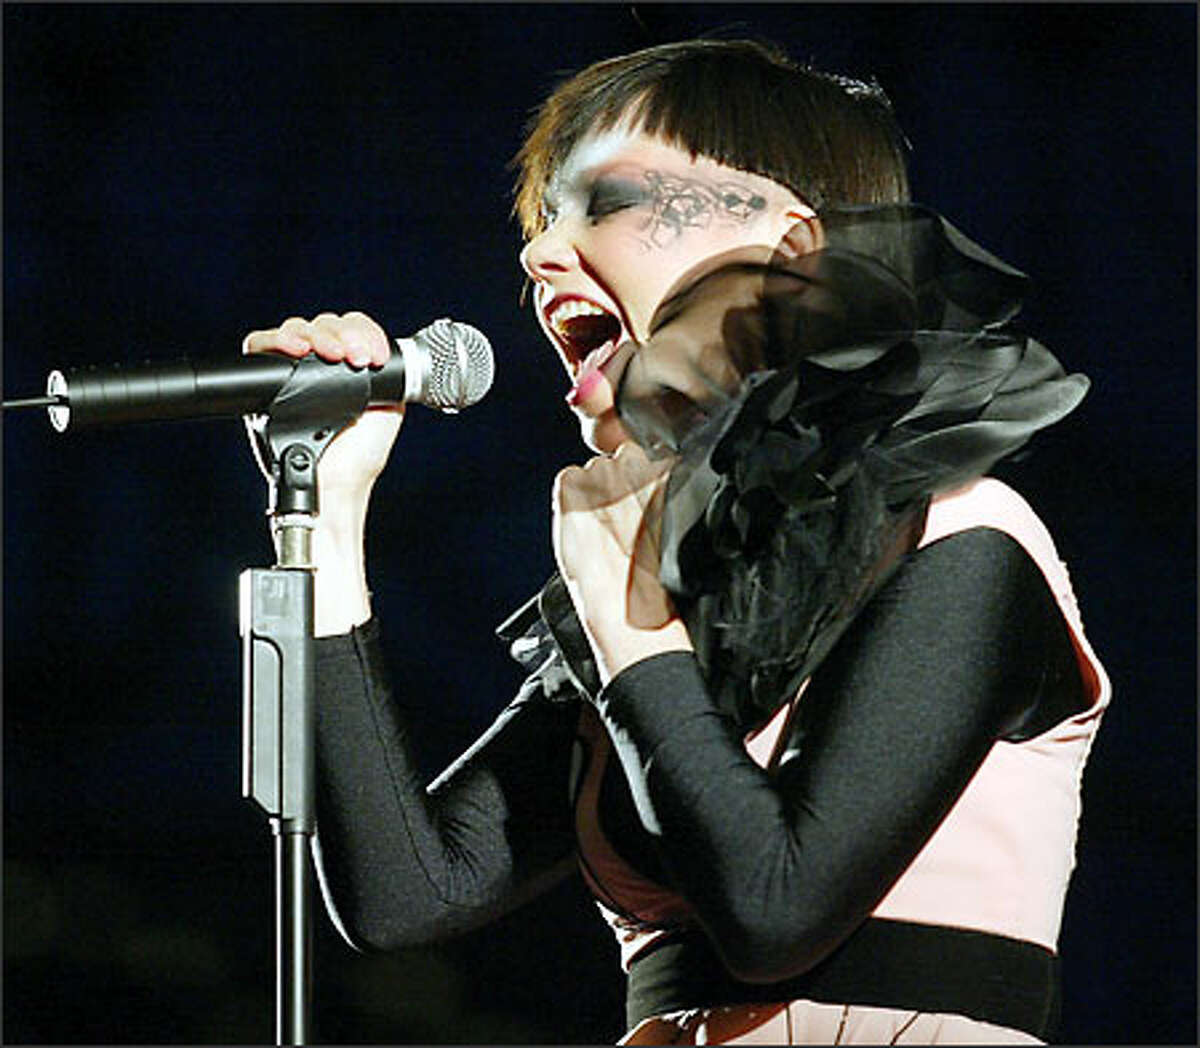 Icelandic singer Bjork opens her set at Pier 62/63, the second show of her U.S. tour and her first show in Seattle since 1995.